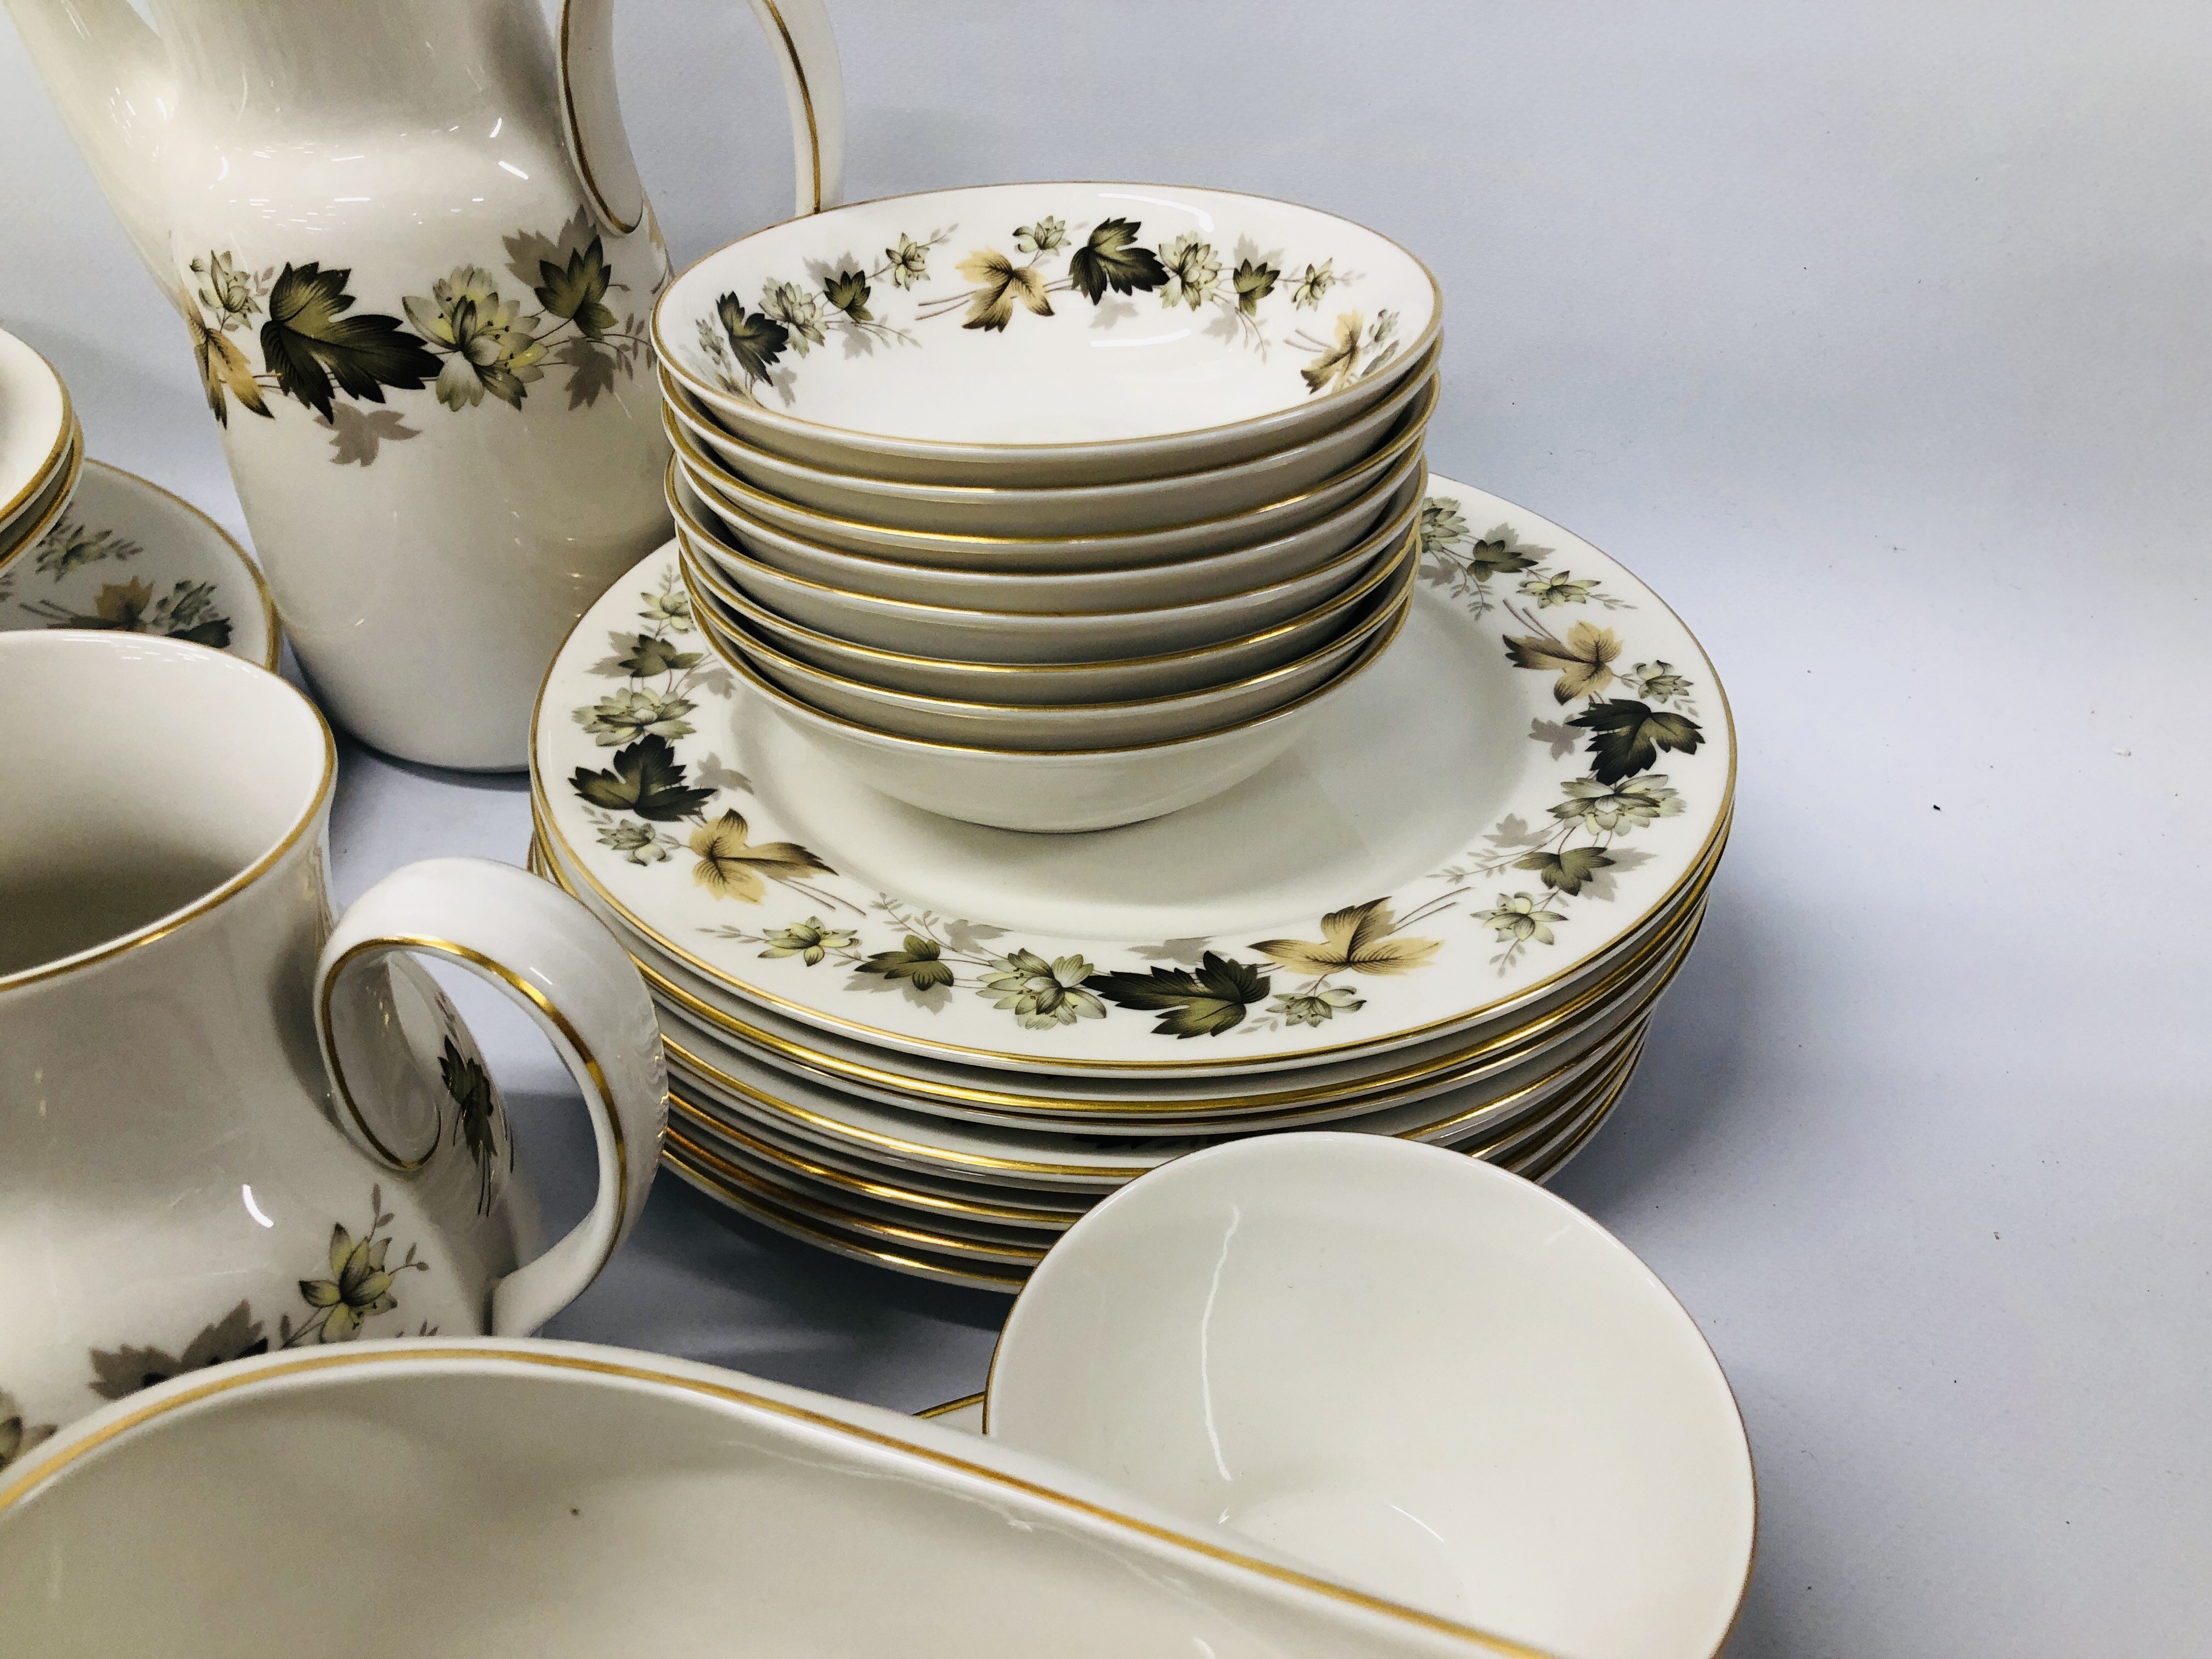 COLLECTION OF ROYAL DOULTON "LARCHMONT" TC1019 TEA AND DINNER WARE (APPROX. - Image 4 of 9